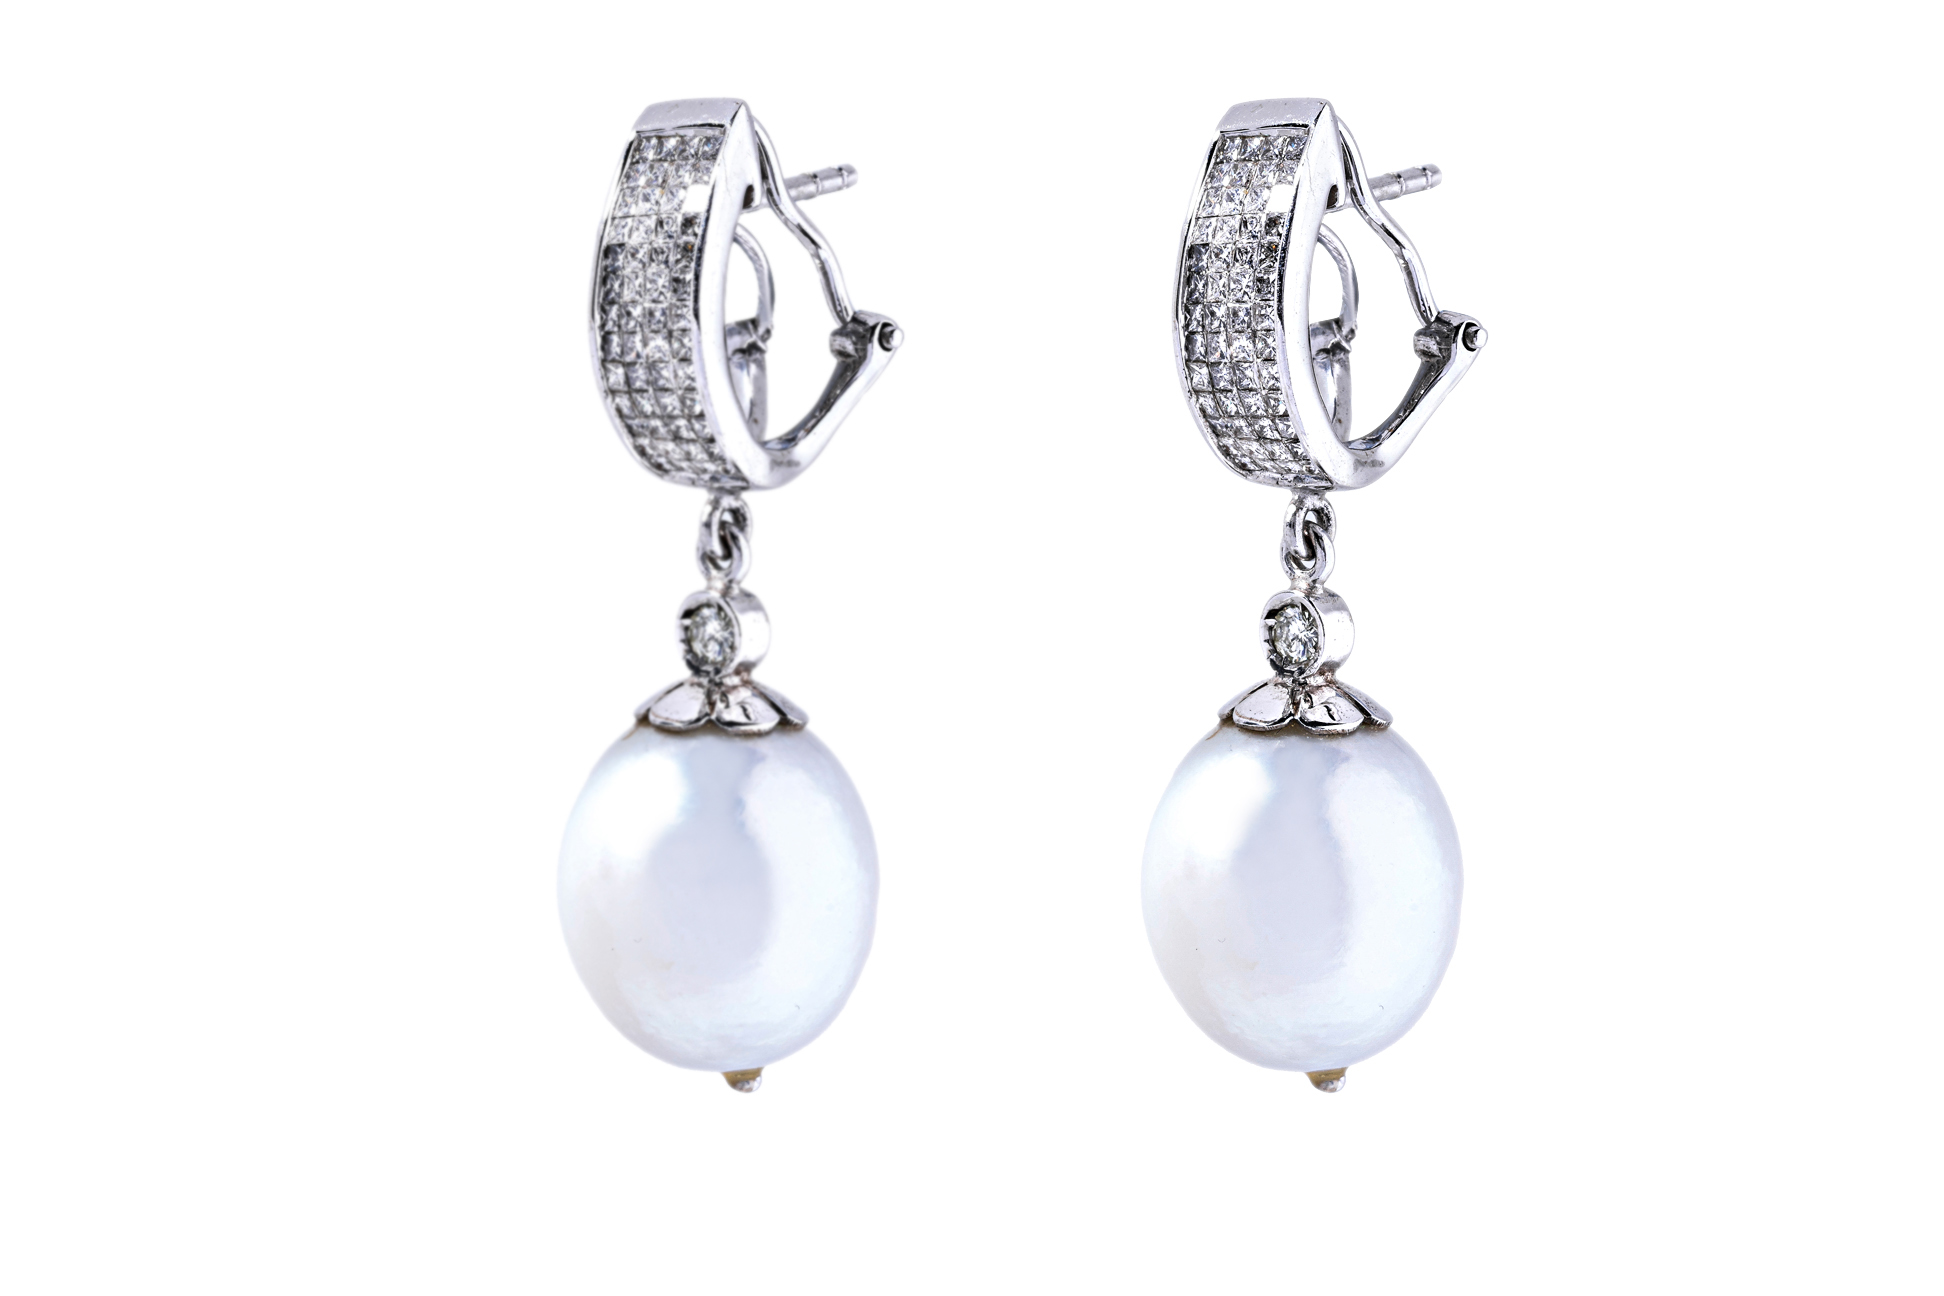 A PAIR OF CULTURED PEARL AND DIAMOND DROP EARRINGS - Image 2 of 4